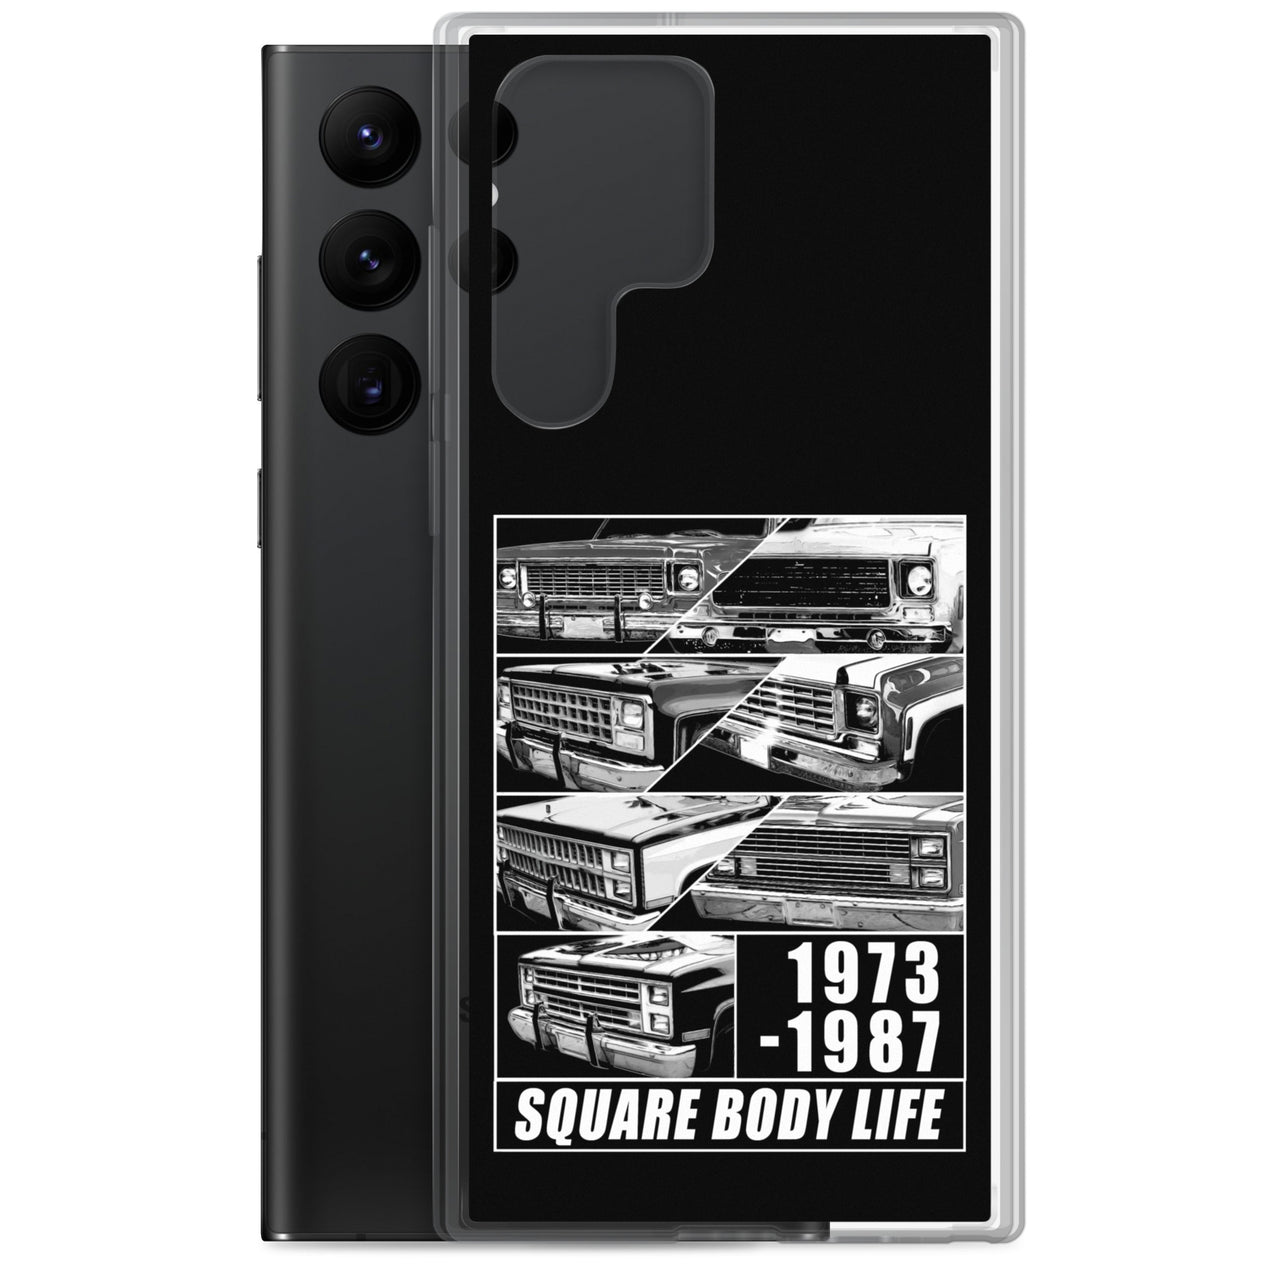 Squarebody Truck Samsung Phone Case For S22 ultra